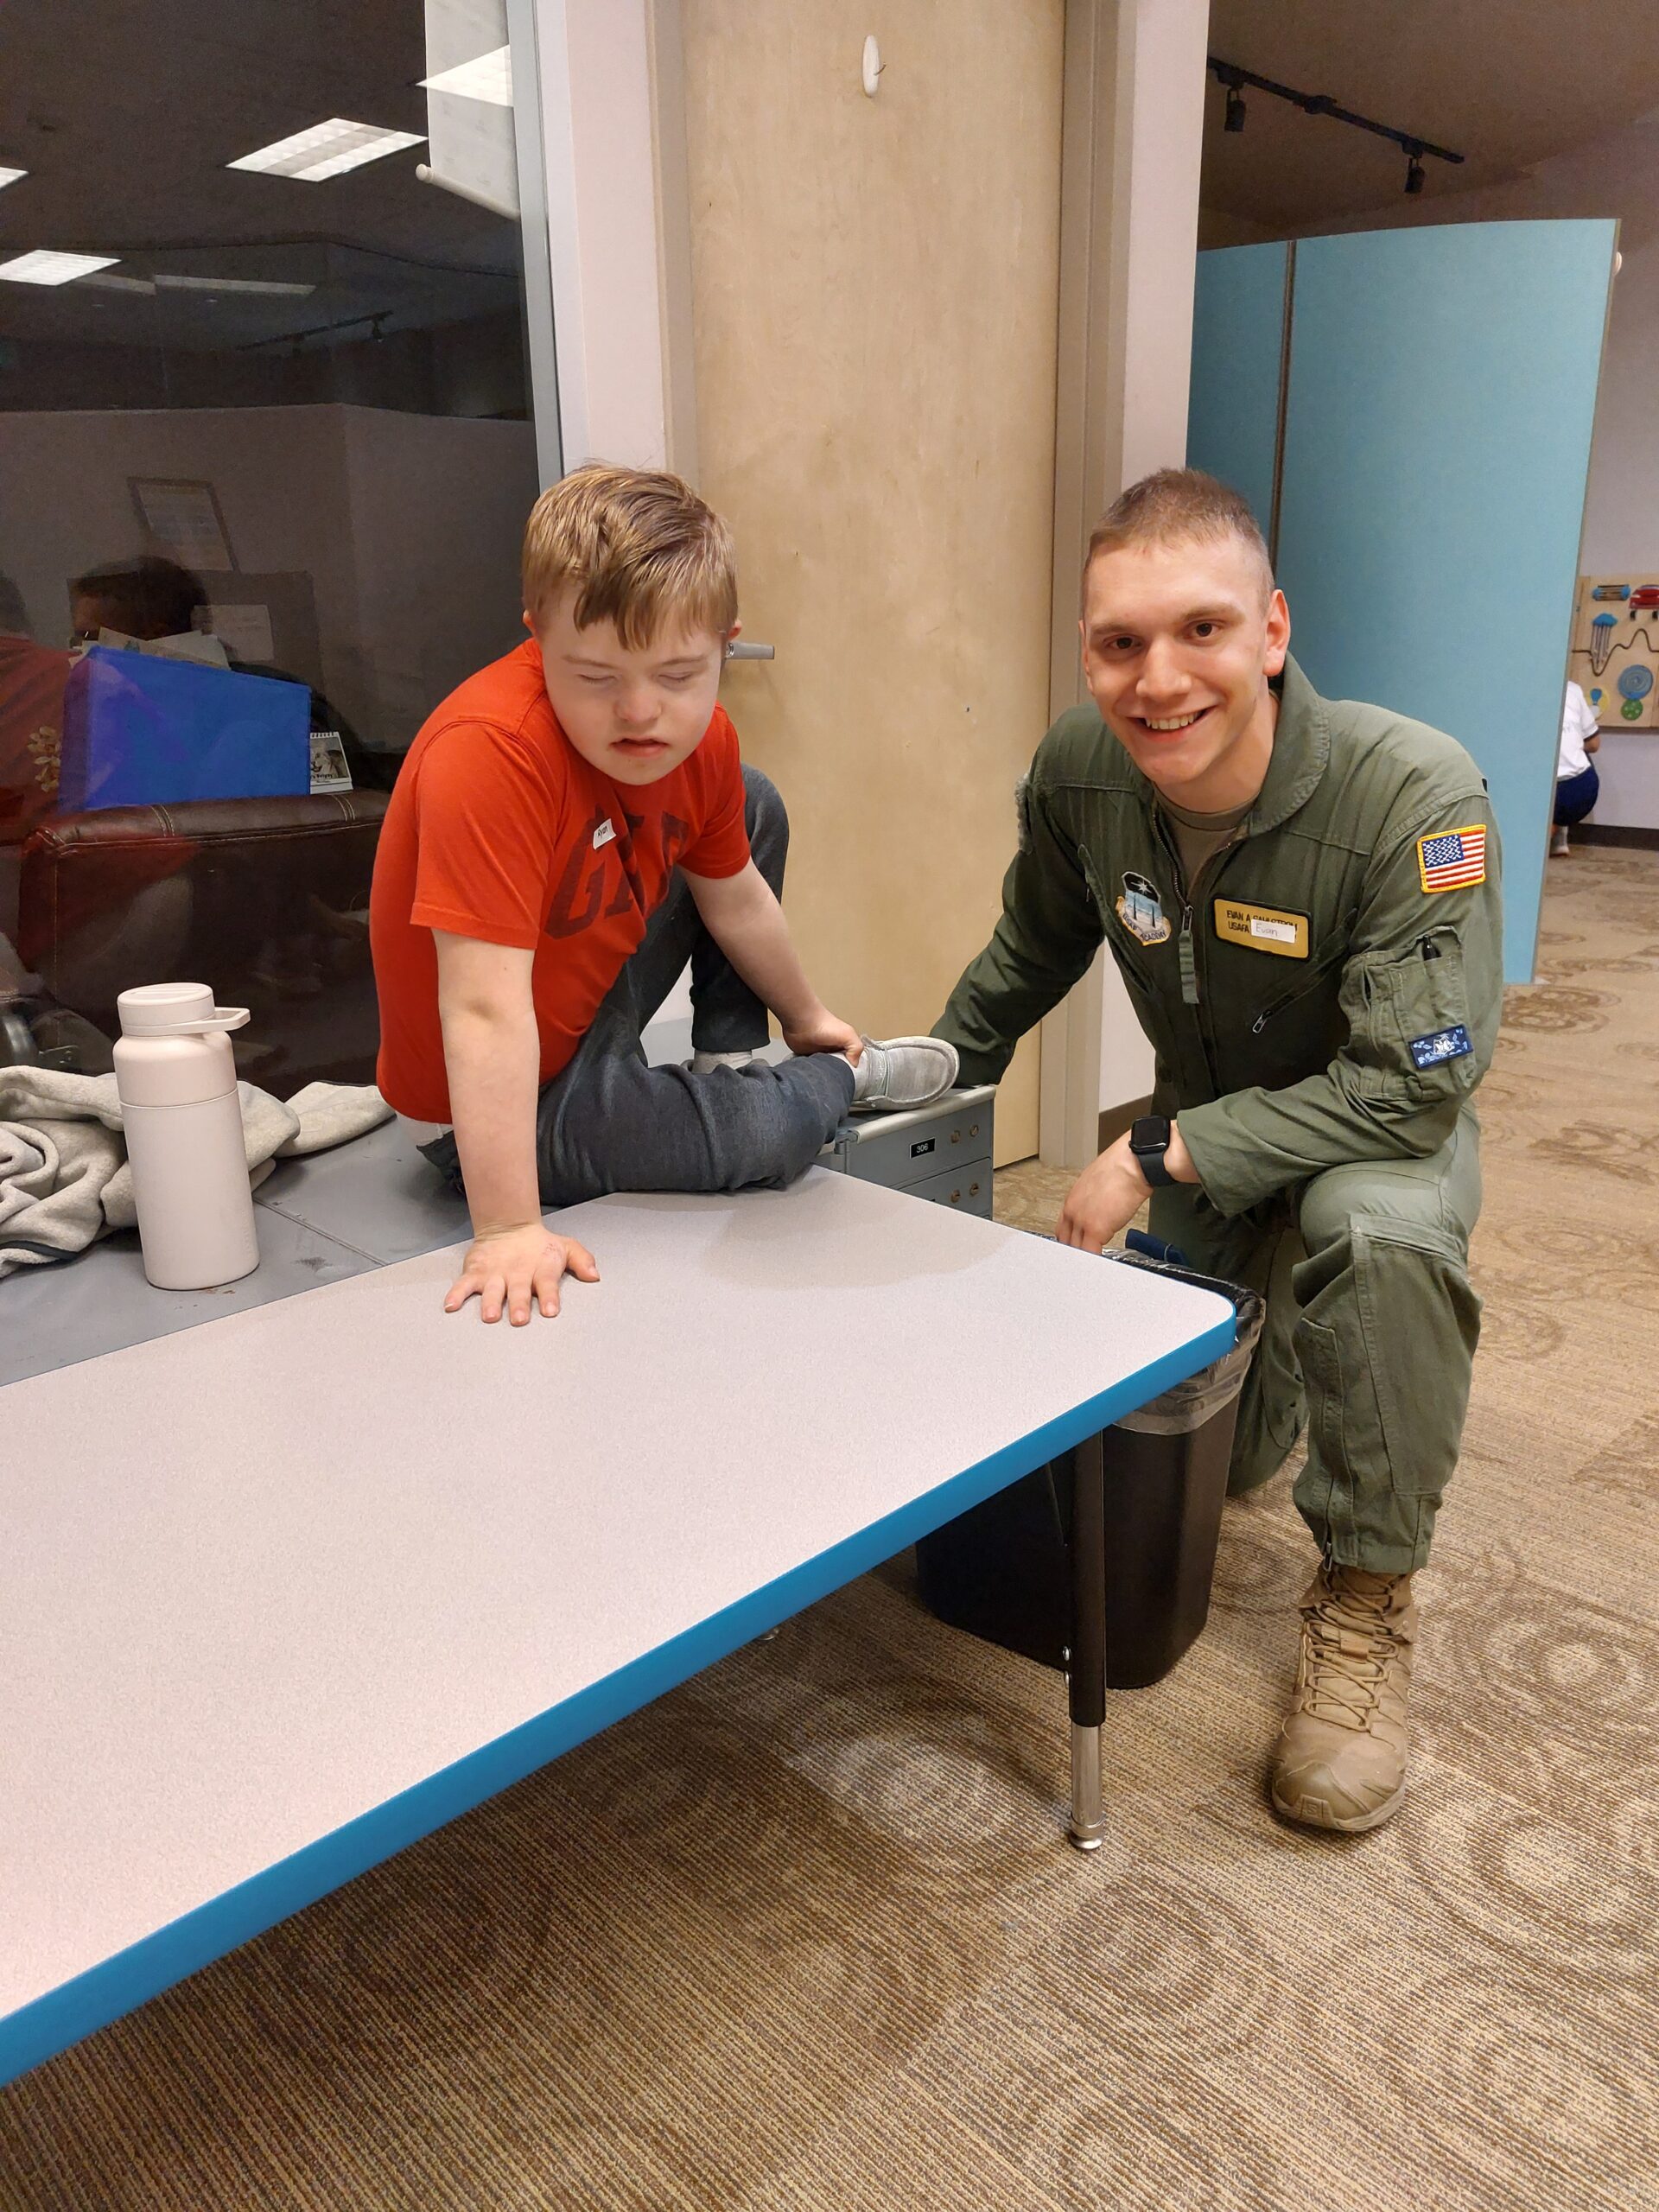 adult in a service uniform kneels next to a child crawling on a table 